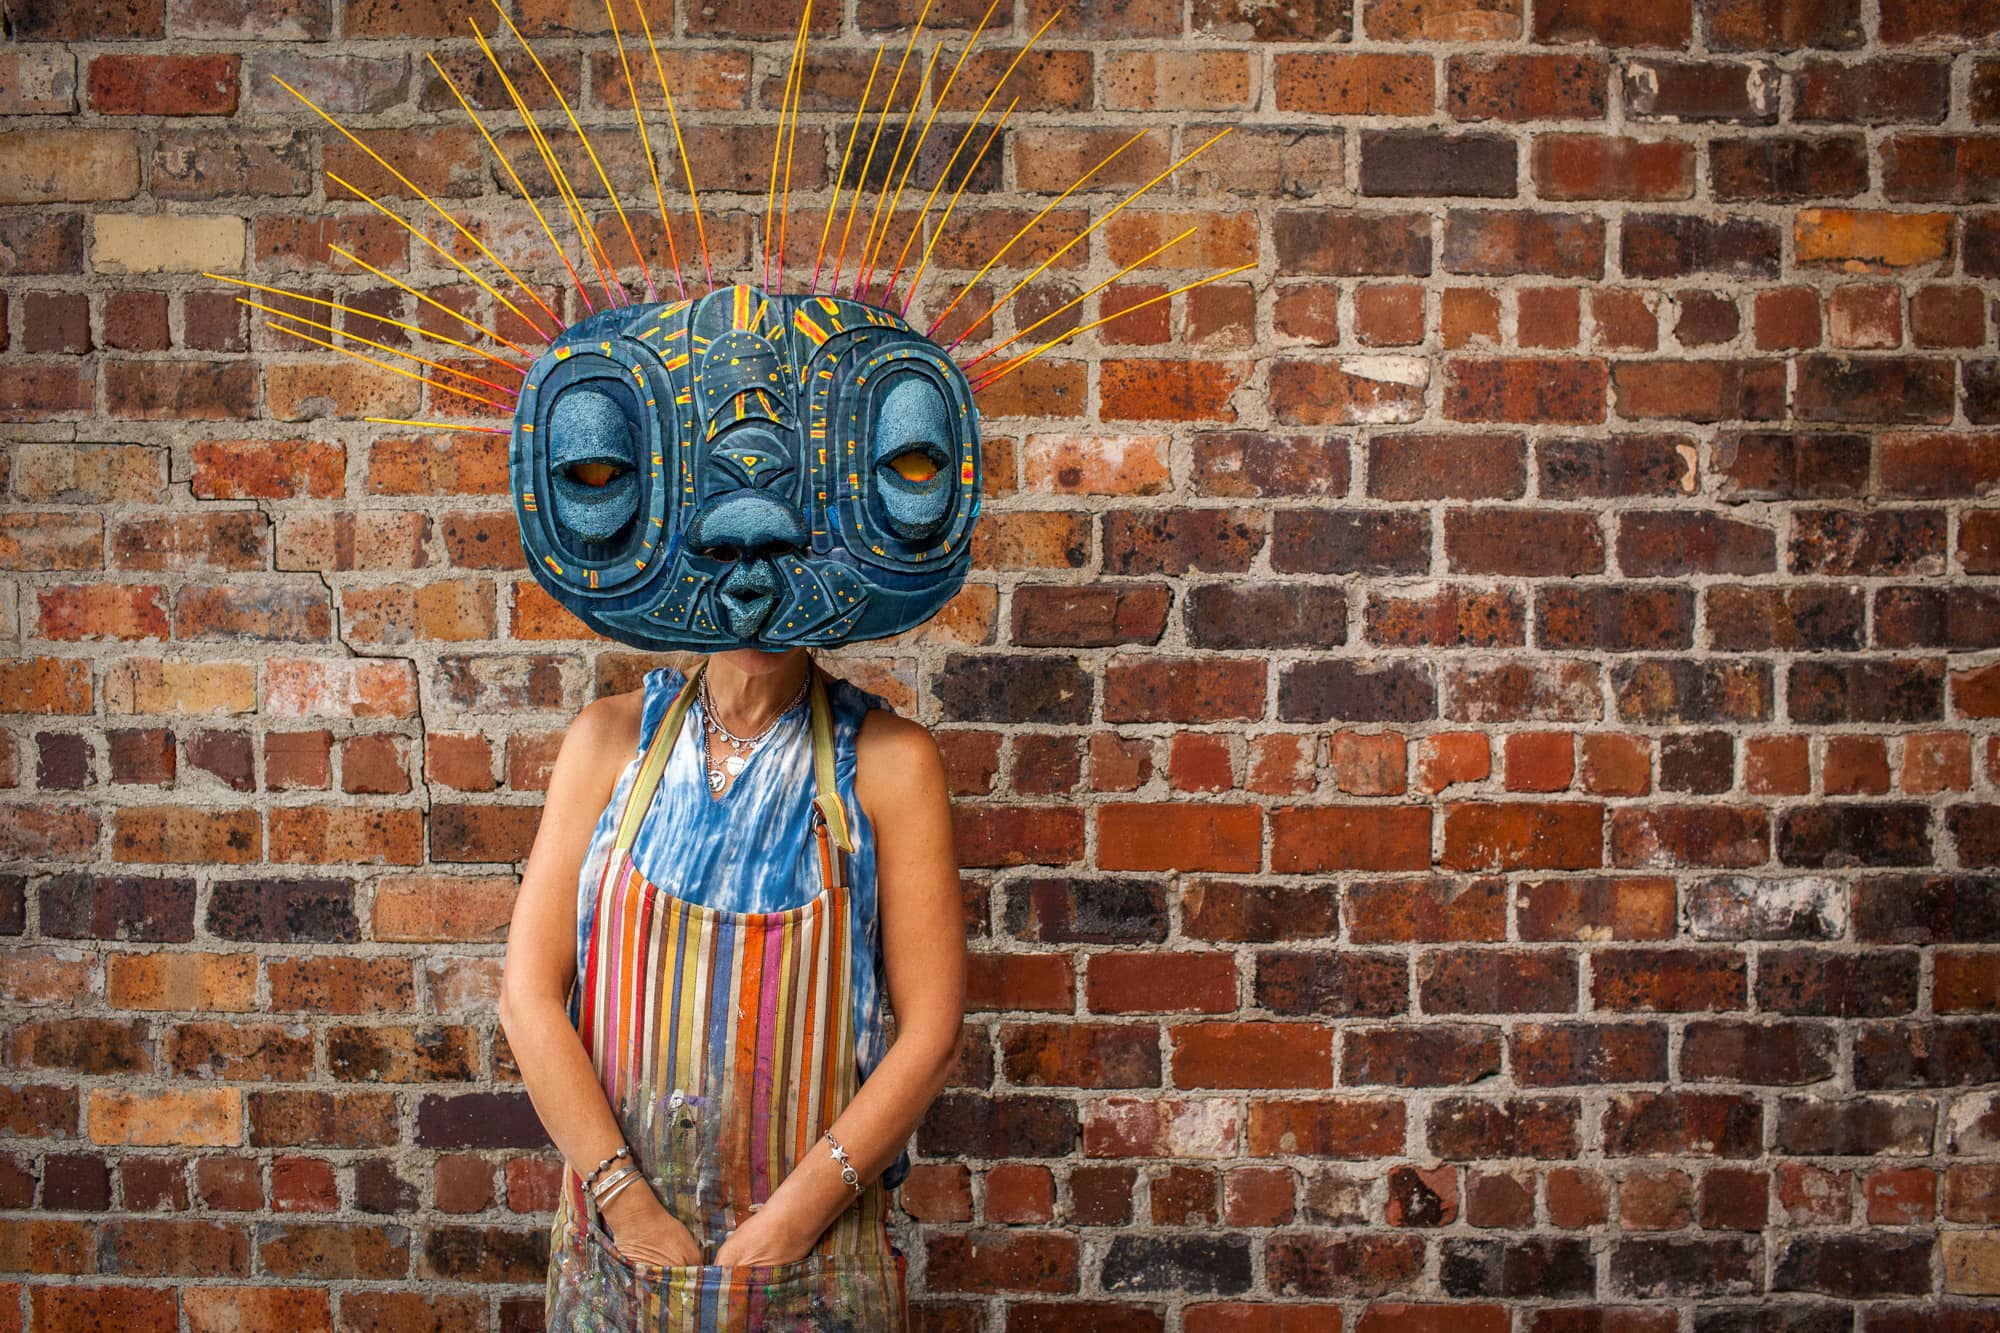 Wendy Minor Viny, a regional artist who works with Passion Works Studio in Athens, models a DIY Halloween mask for the annual Honey for the Heart parade. The mask, created by Viny, can be made with cardboard, a pool noodle, a bike inner-tube, and some paint.